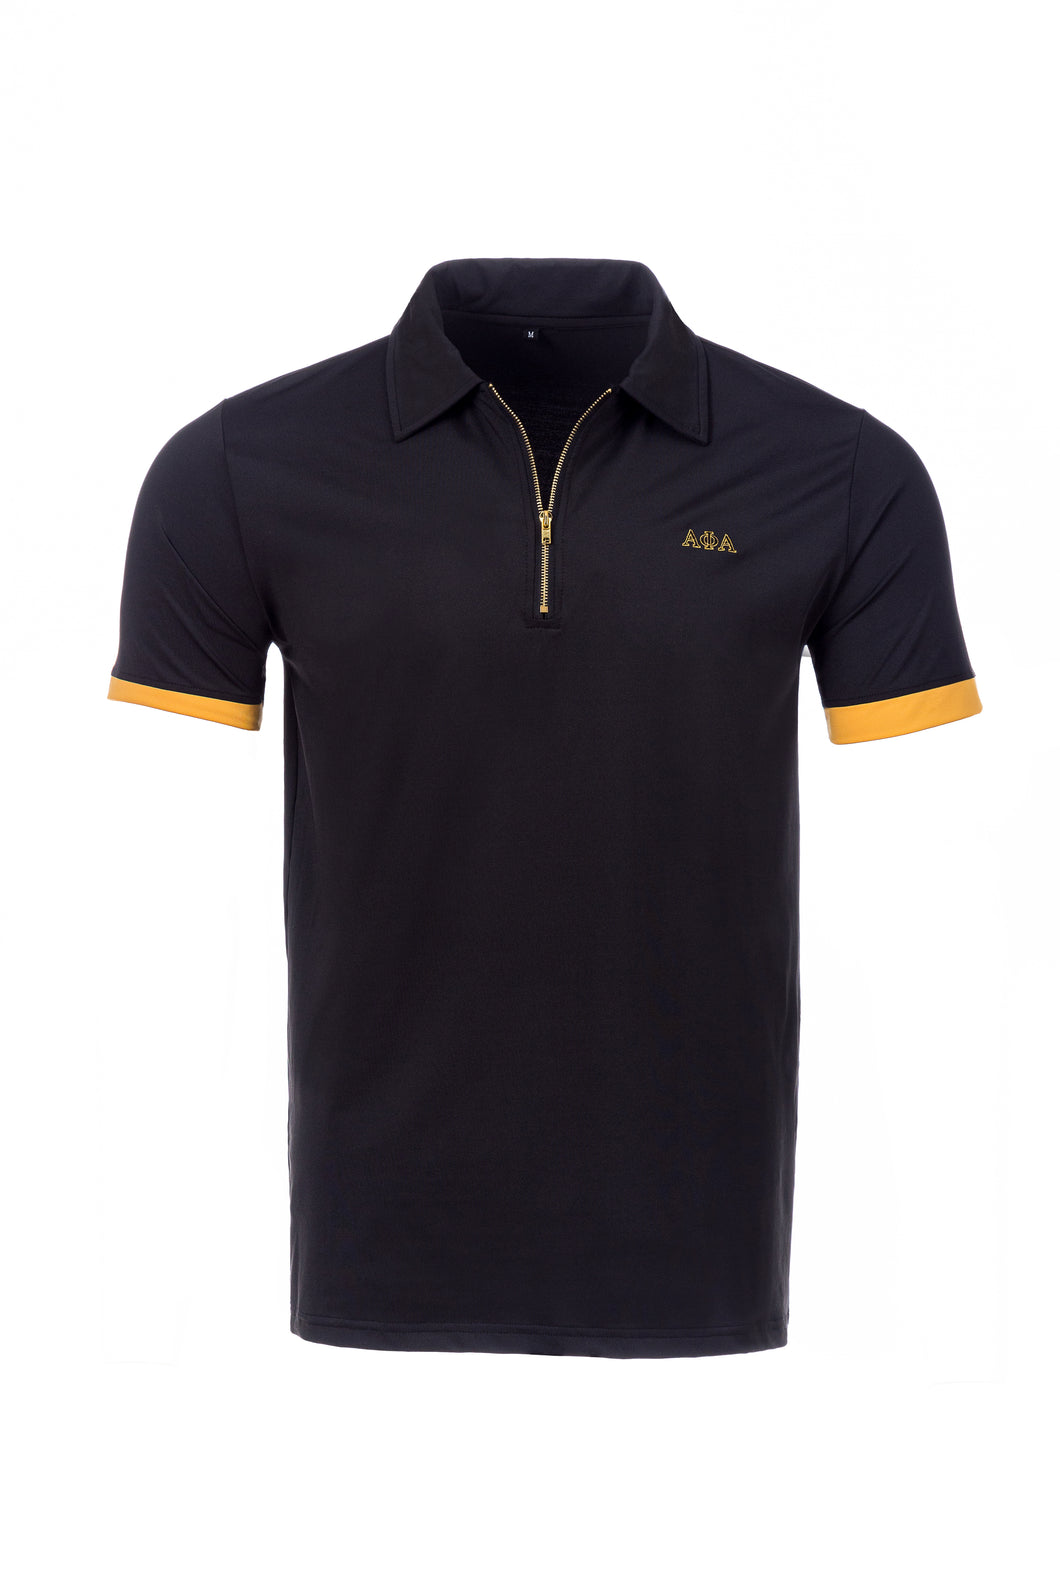 Black and Gold Golf Polo